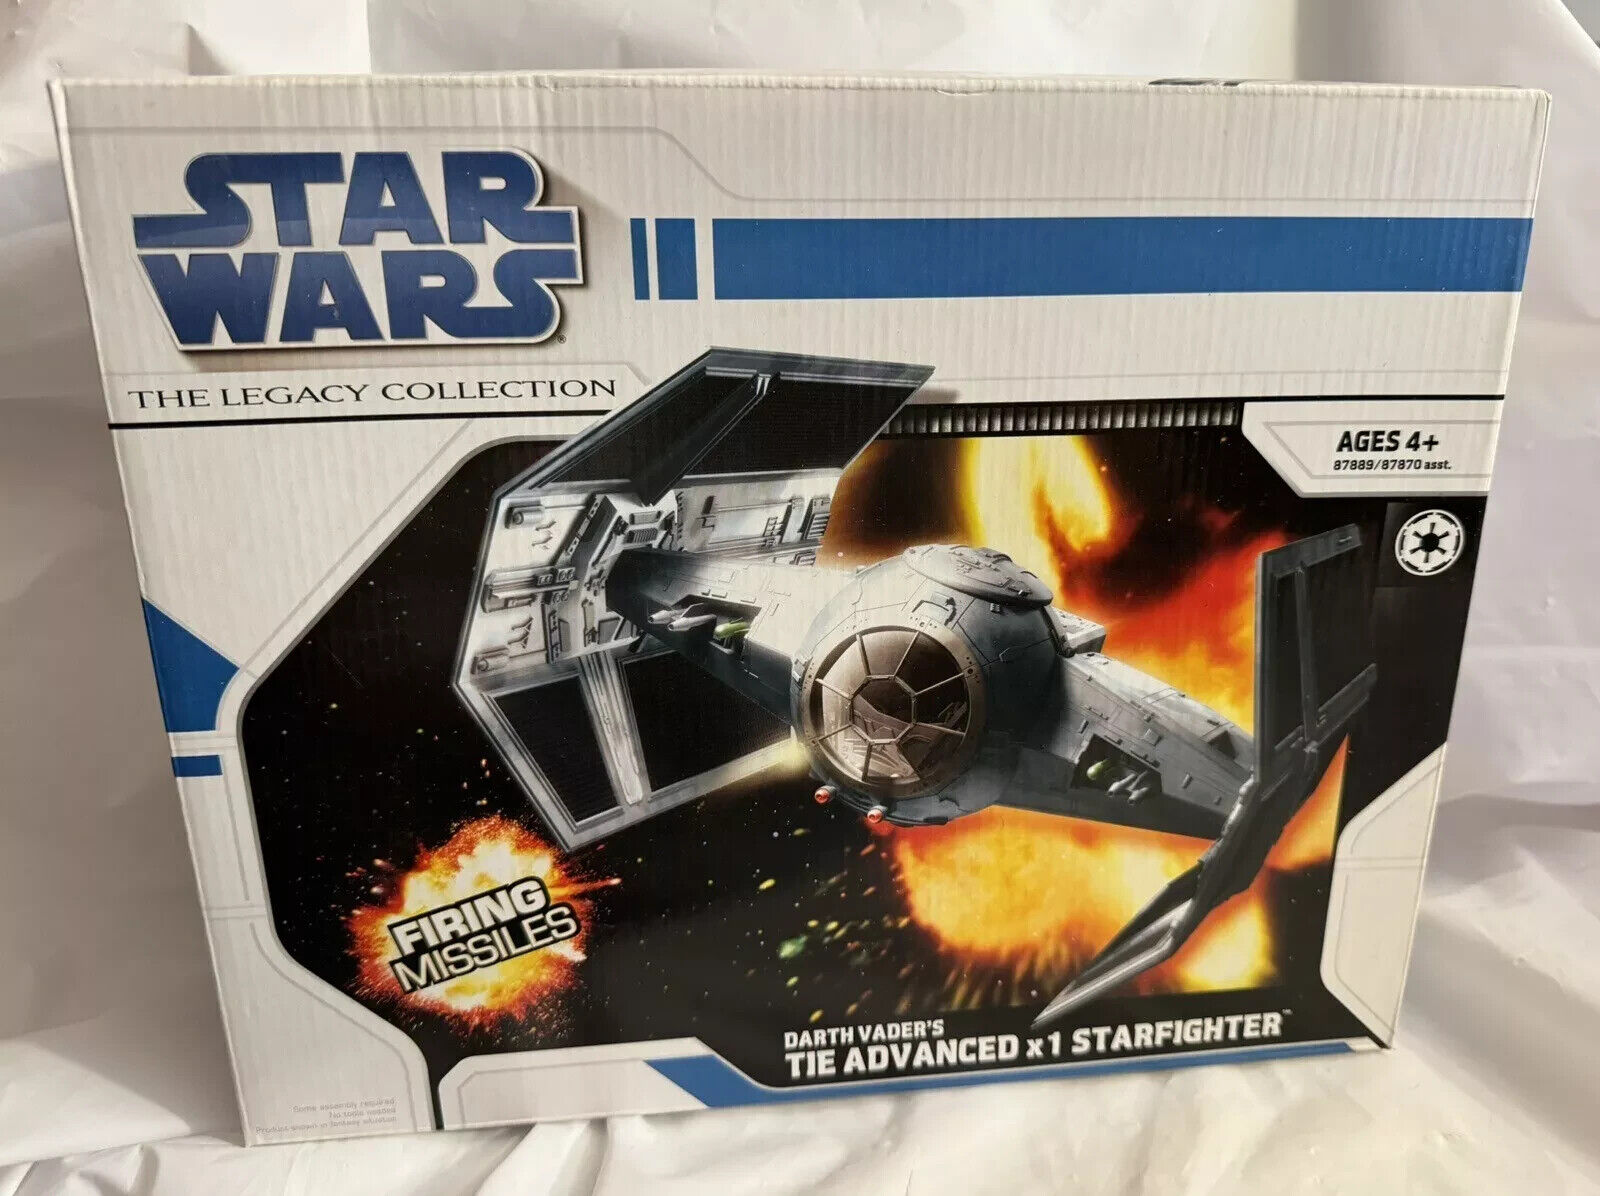 STAR WARS LEGACY COLLECTION DARTH VADER\'S TIE ADVANCED X1 STARFIGHTER NEW SEALED